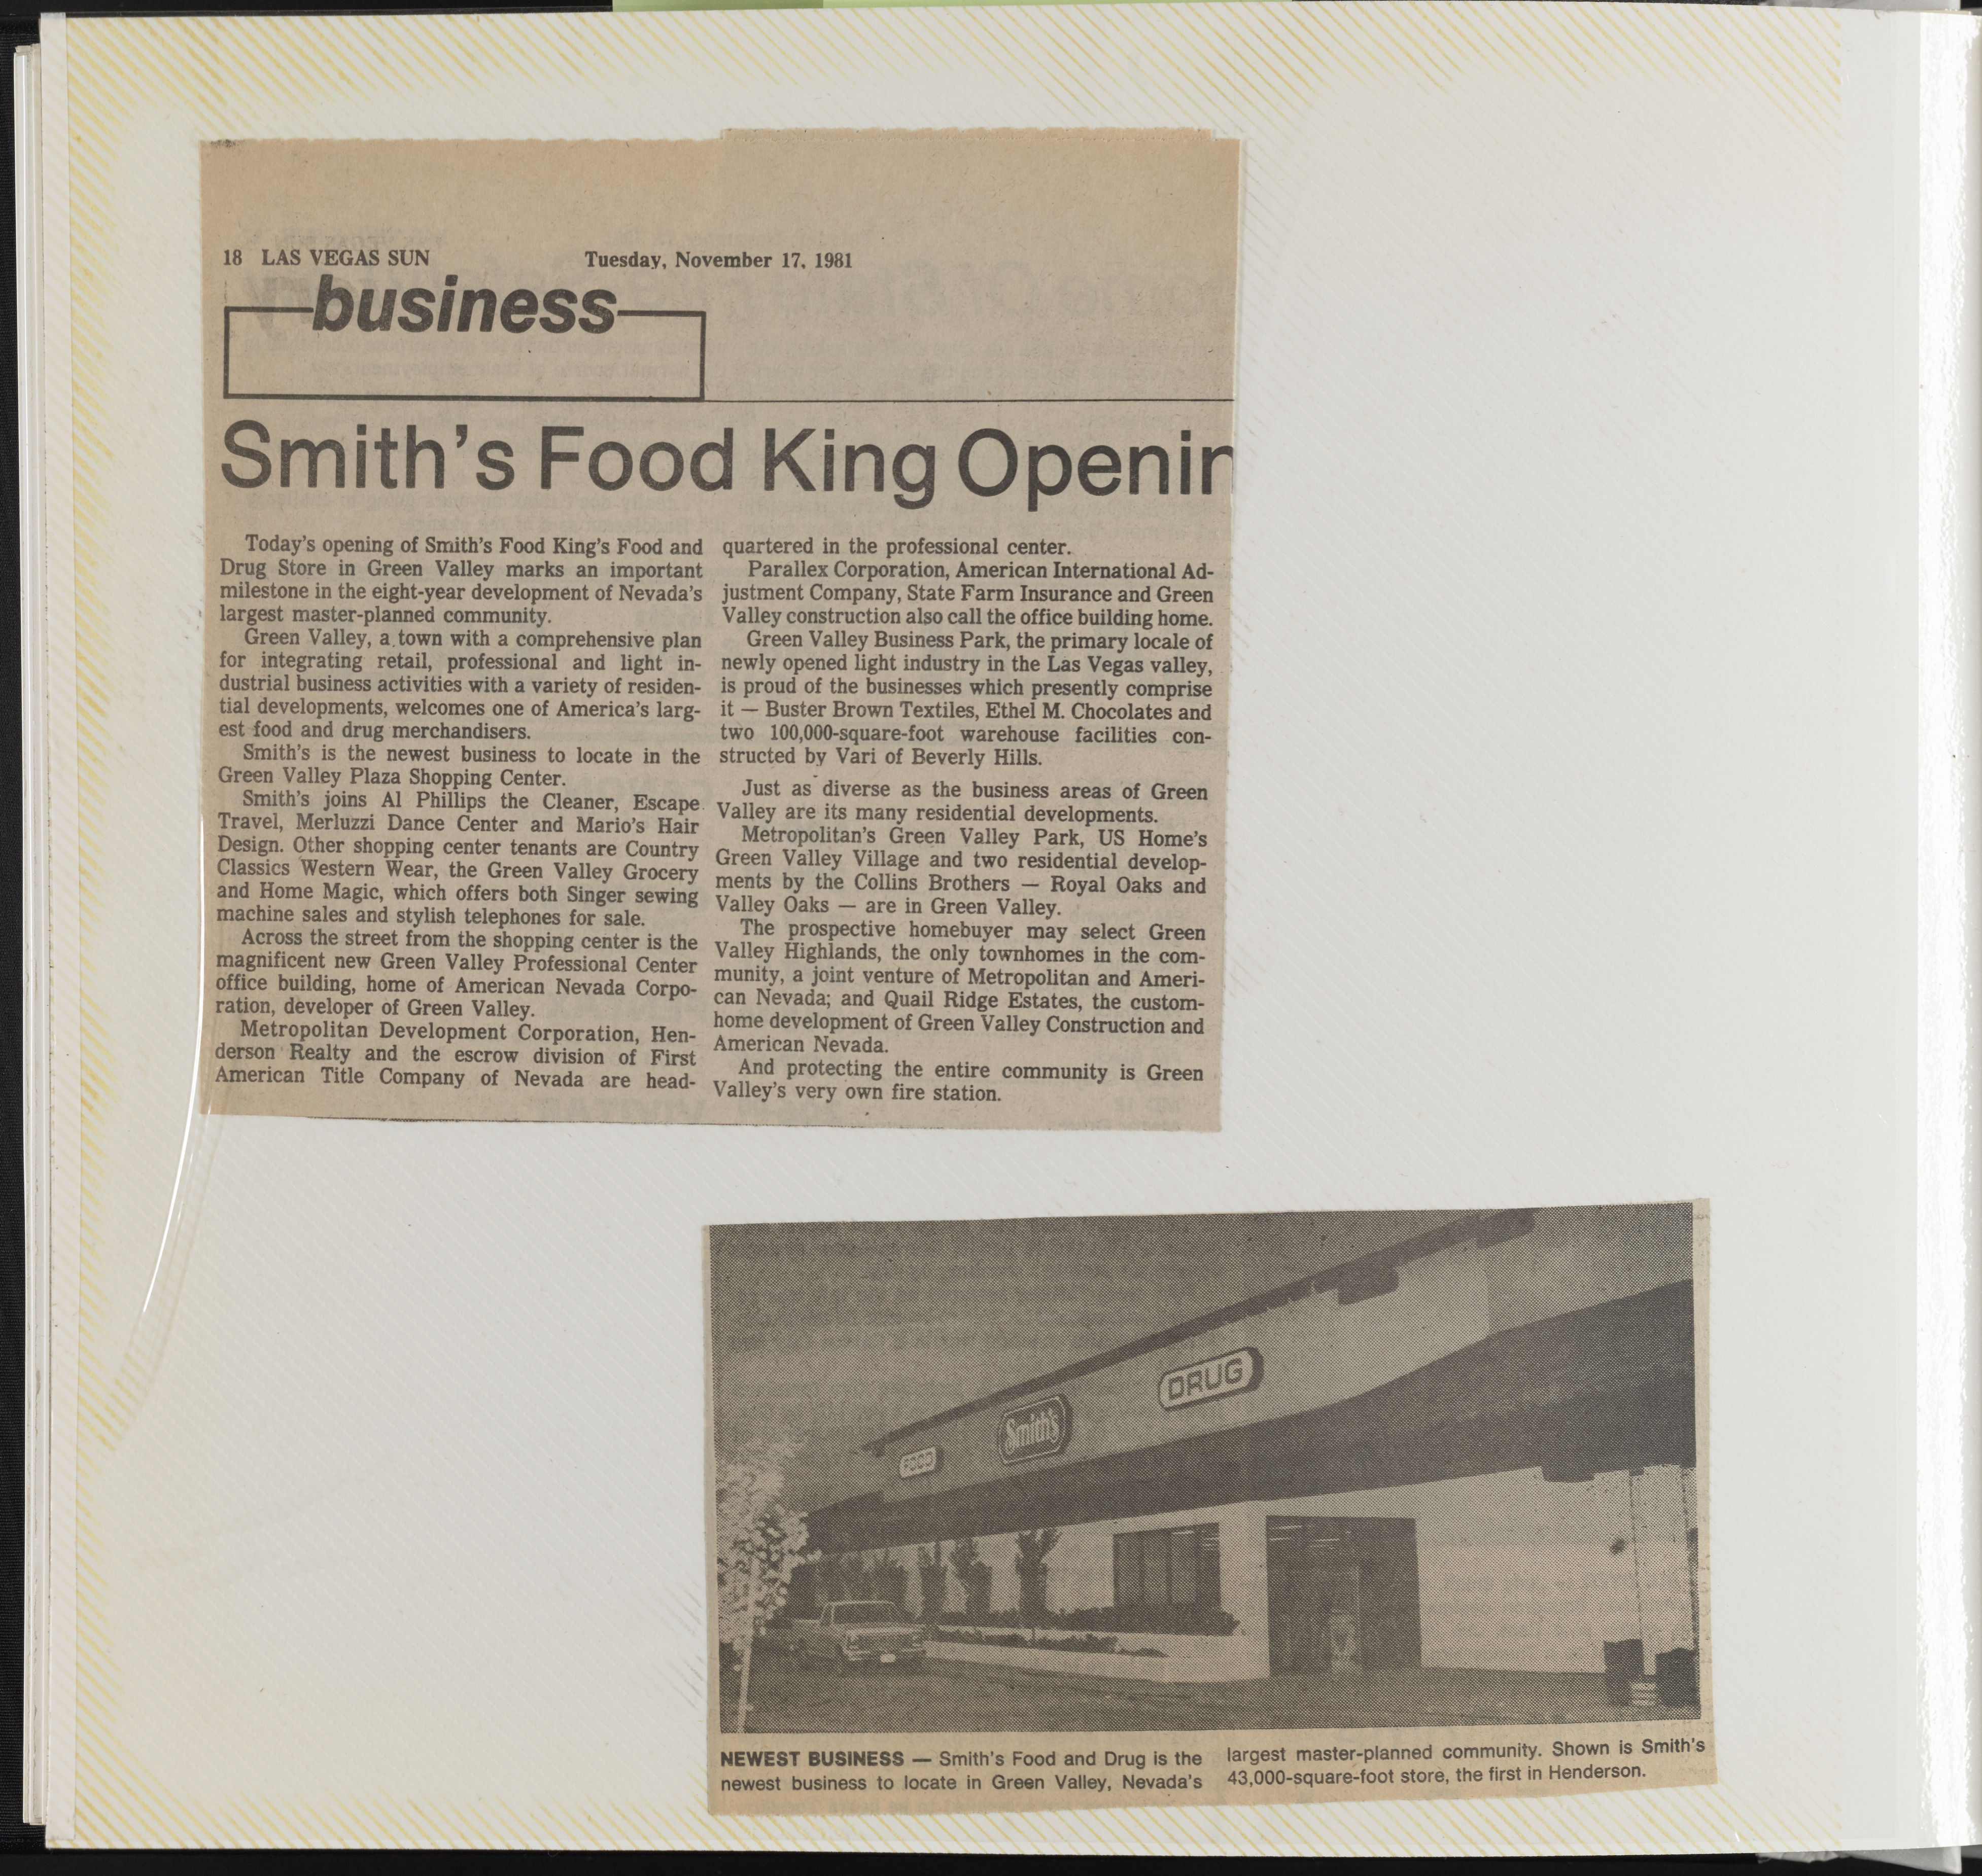 Newspaper clippings, Smith's Food King Opening, Las Vegas Sun, November 17, 1981